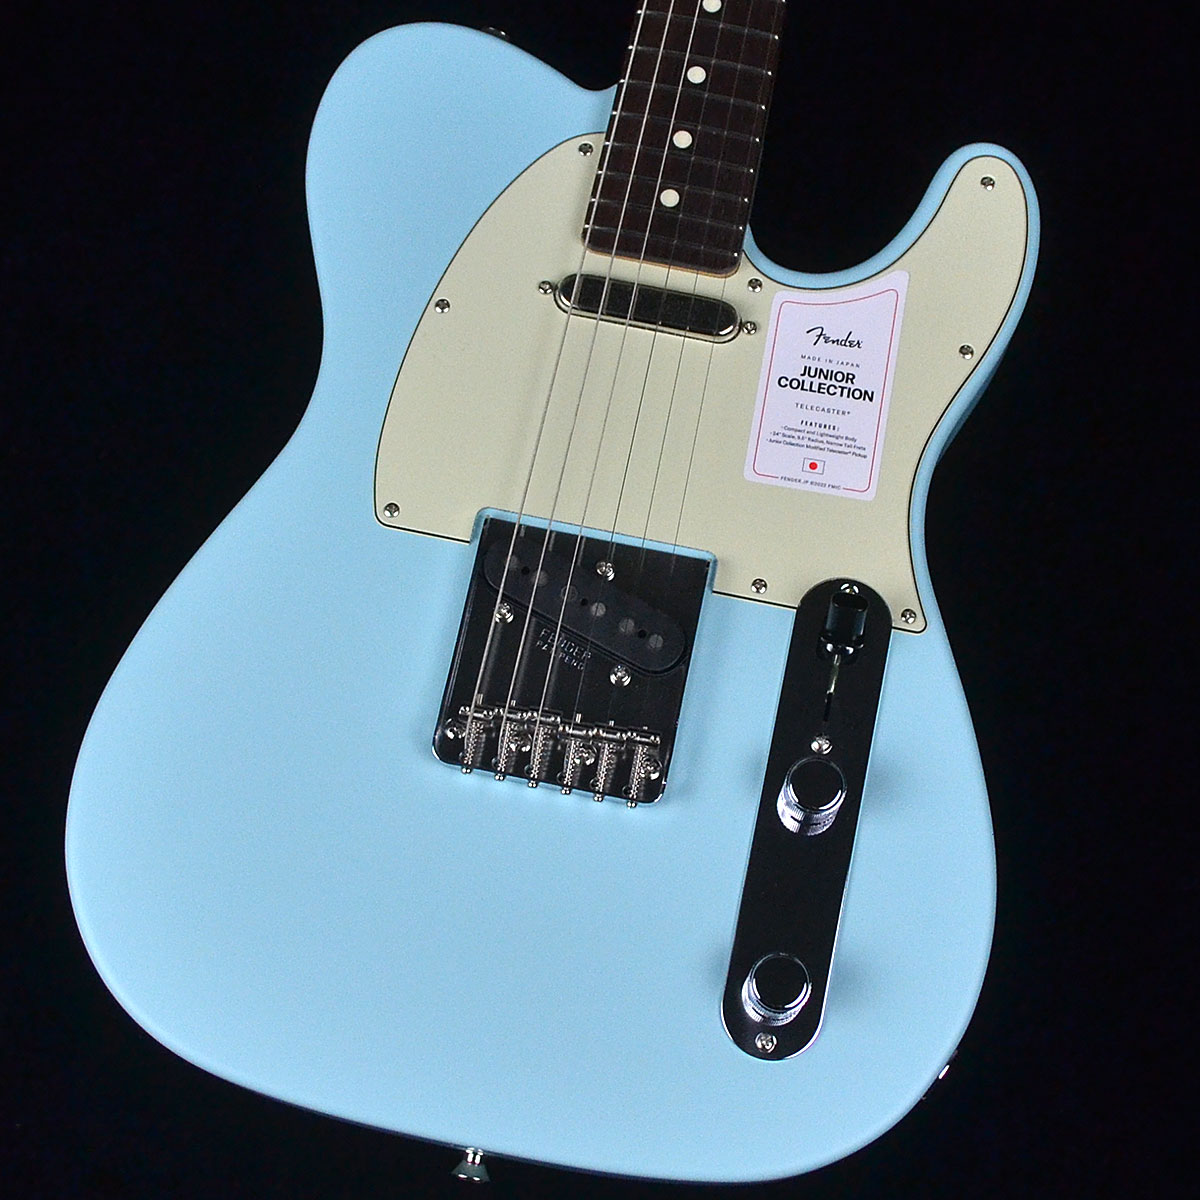 Fender Made In Japan Junior Collection Telecaster Satin Daphune